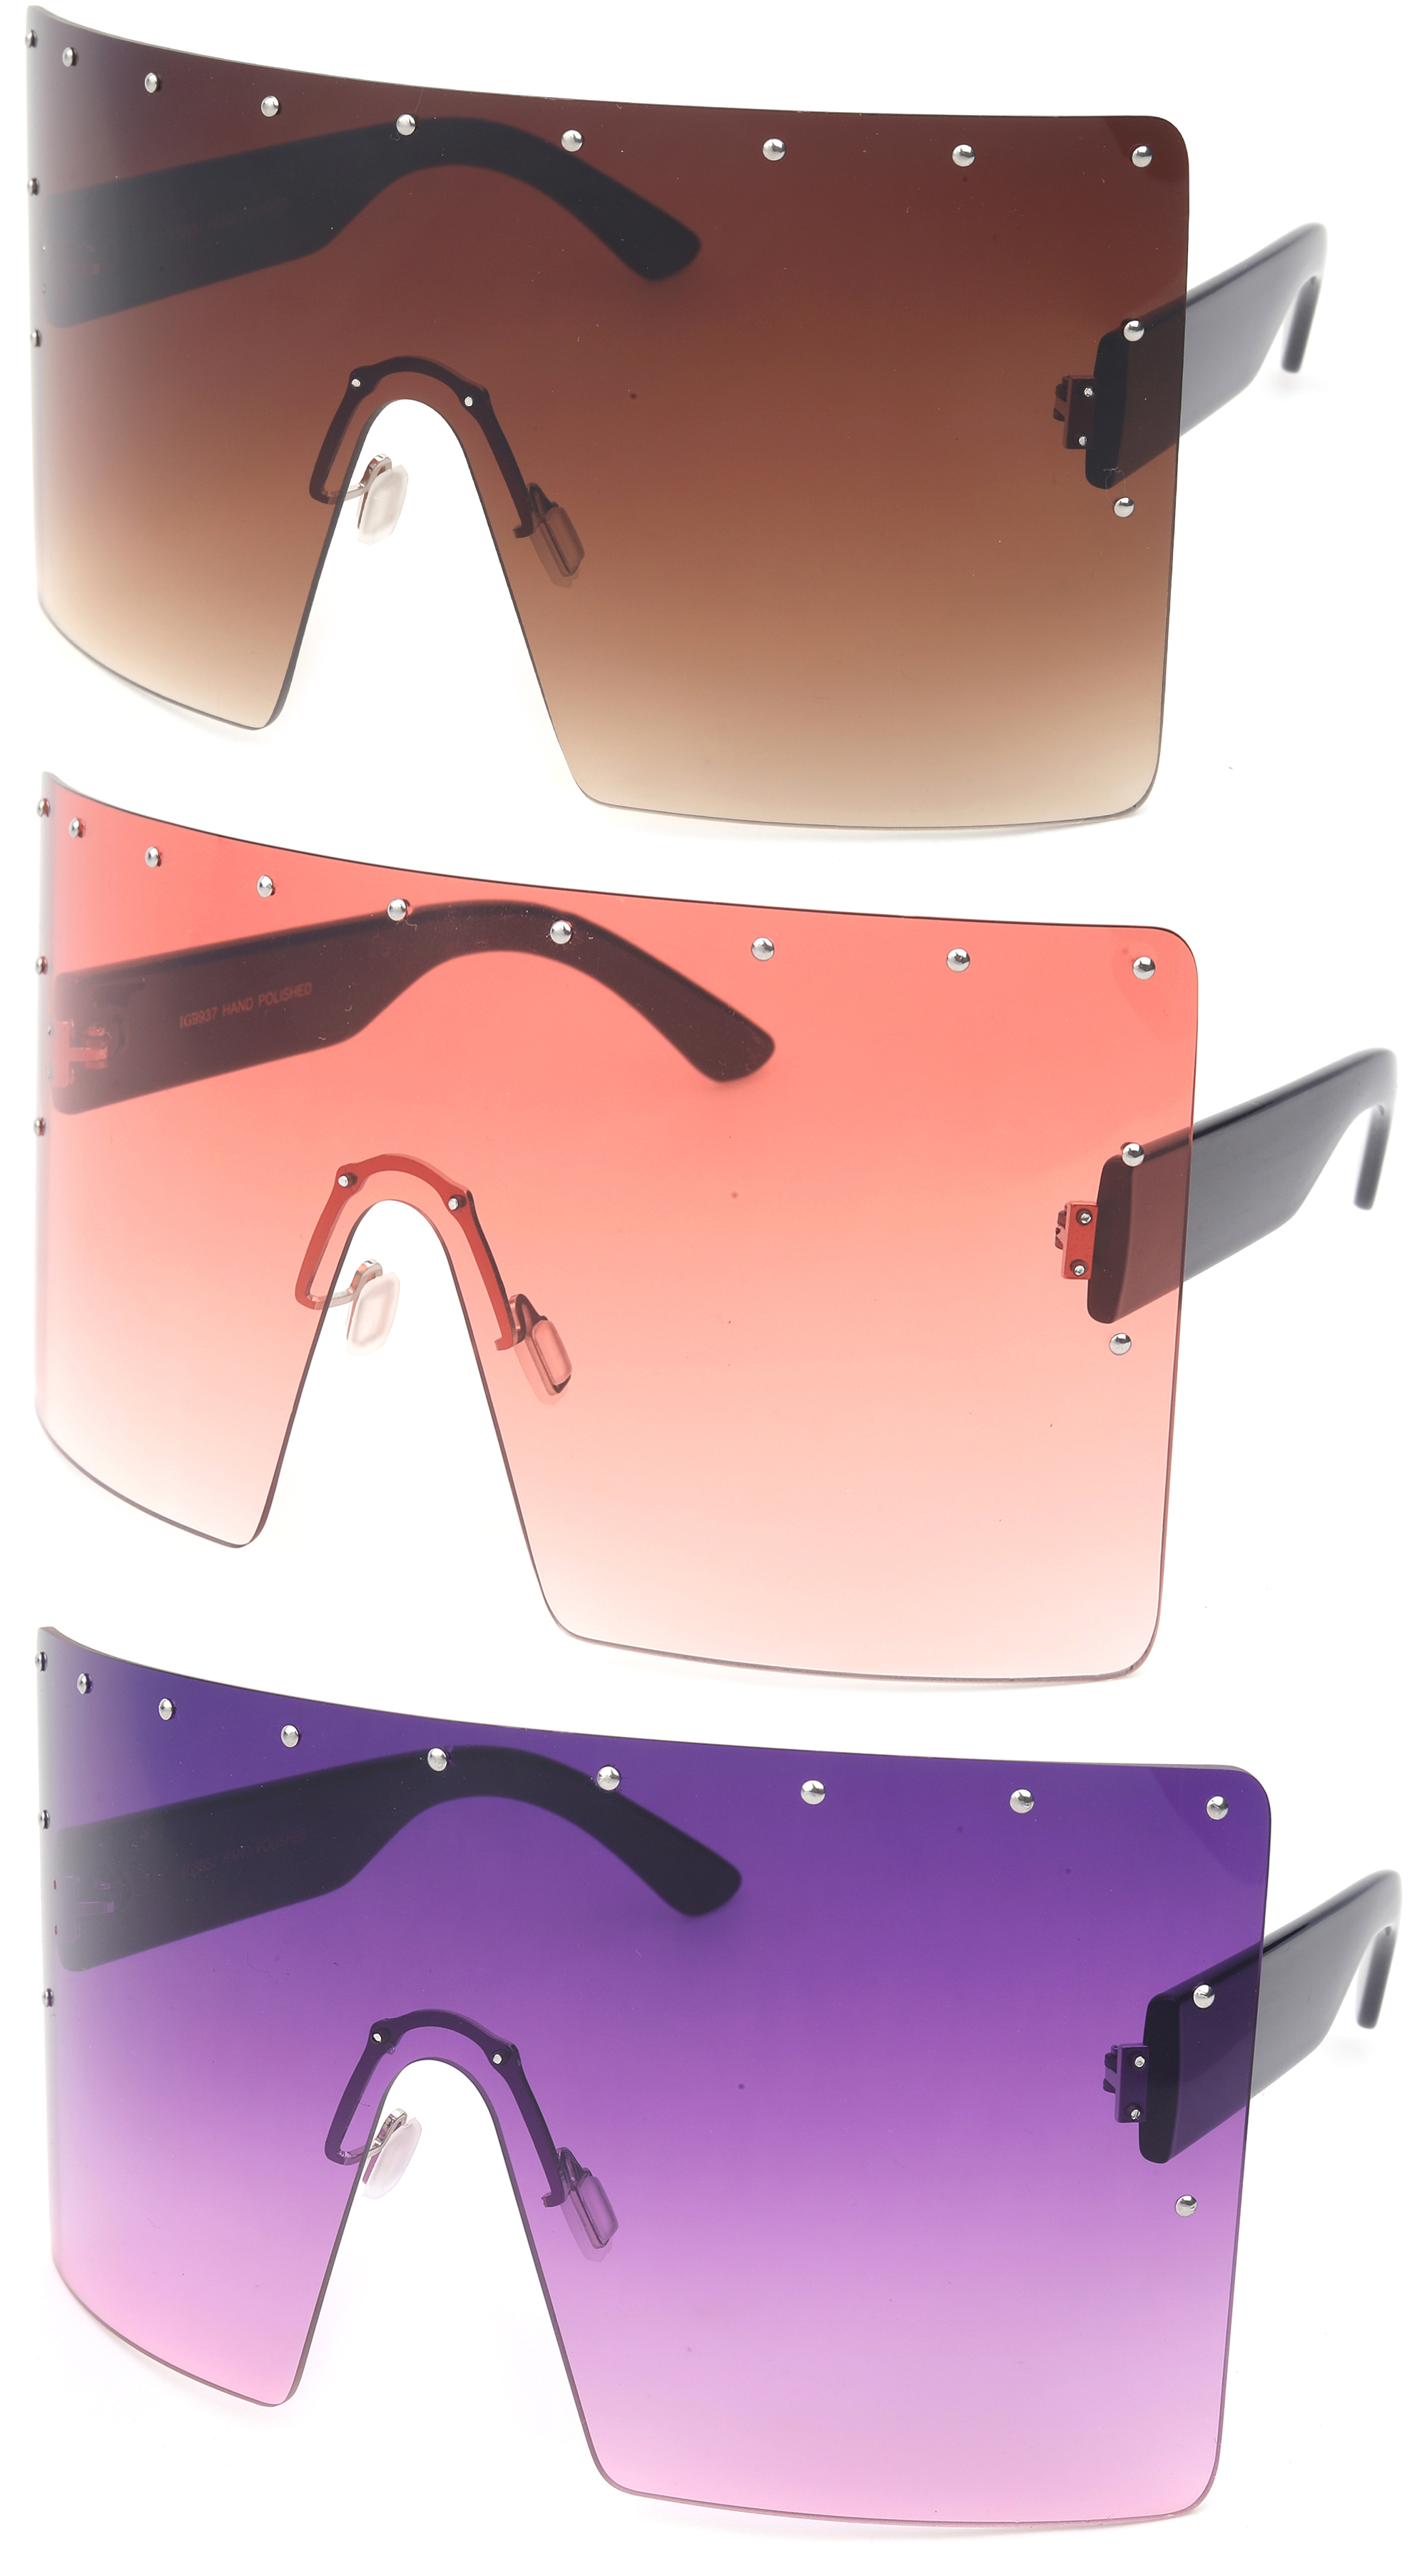 3 Pairs Newbee Fashion One Piece Lens Oversized Square Rimless Large Fashion Sunglasses for Women, 7*3.25 inches Rectangle Flat Top Face Shield, Pins Decorations, UV 400 Lens, Brown & Red & Purple - image 1 of 2